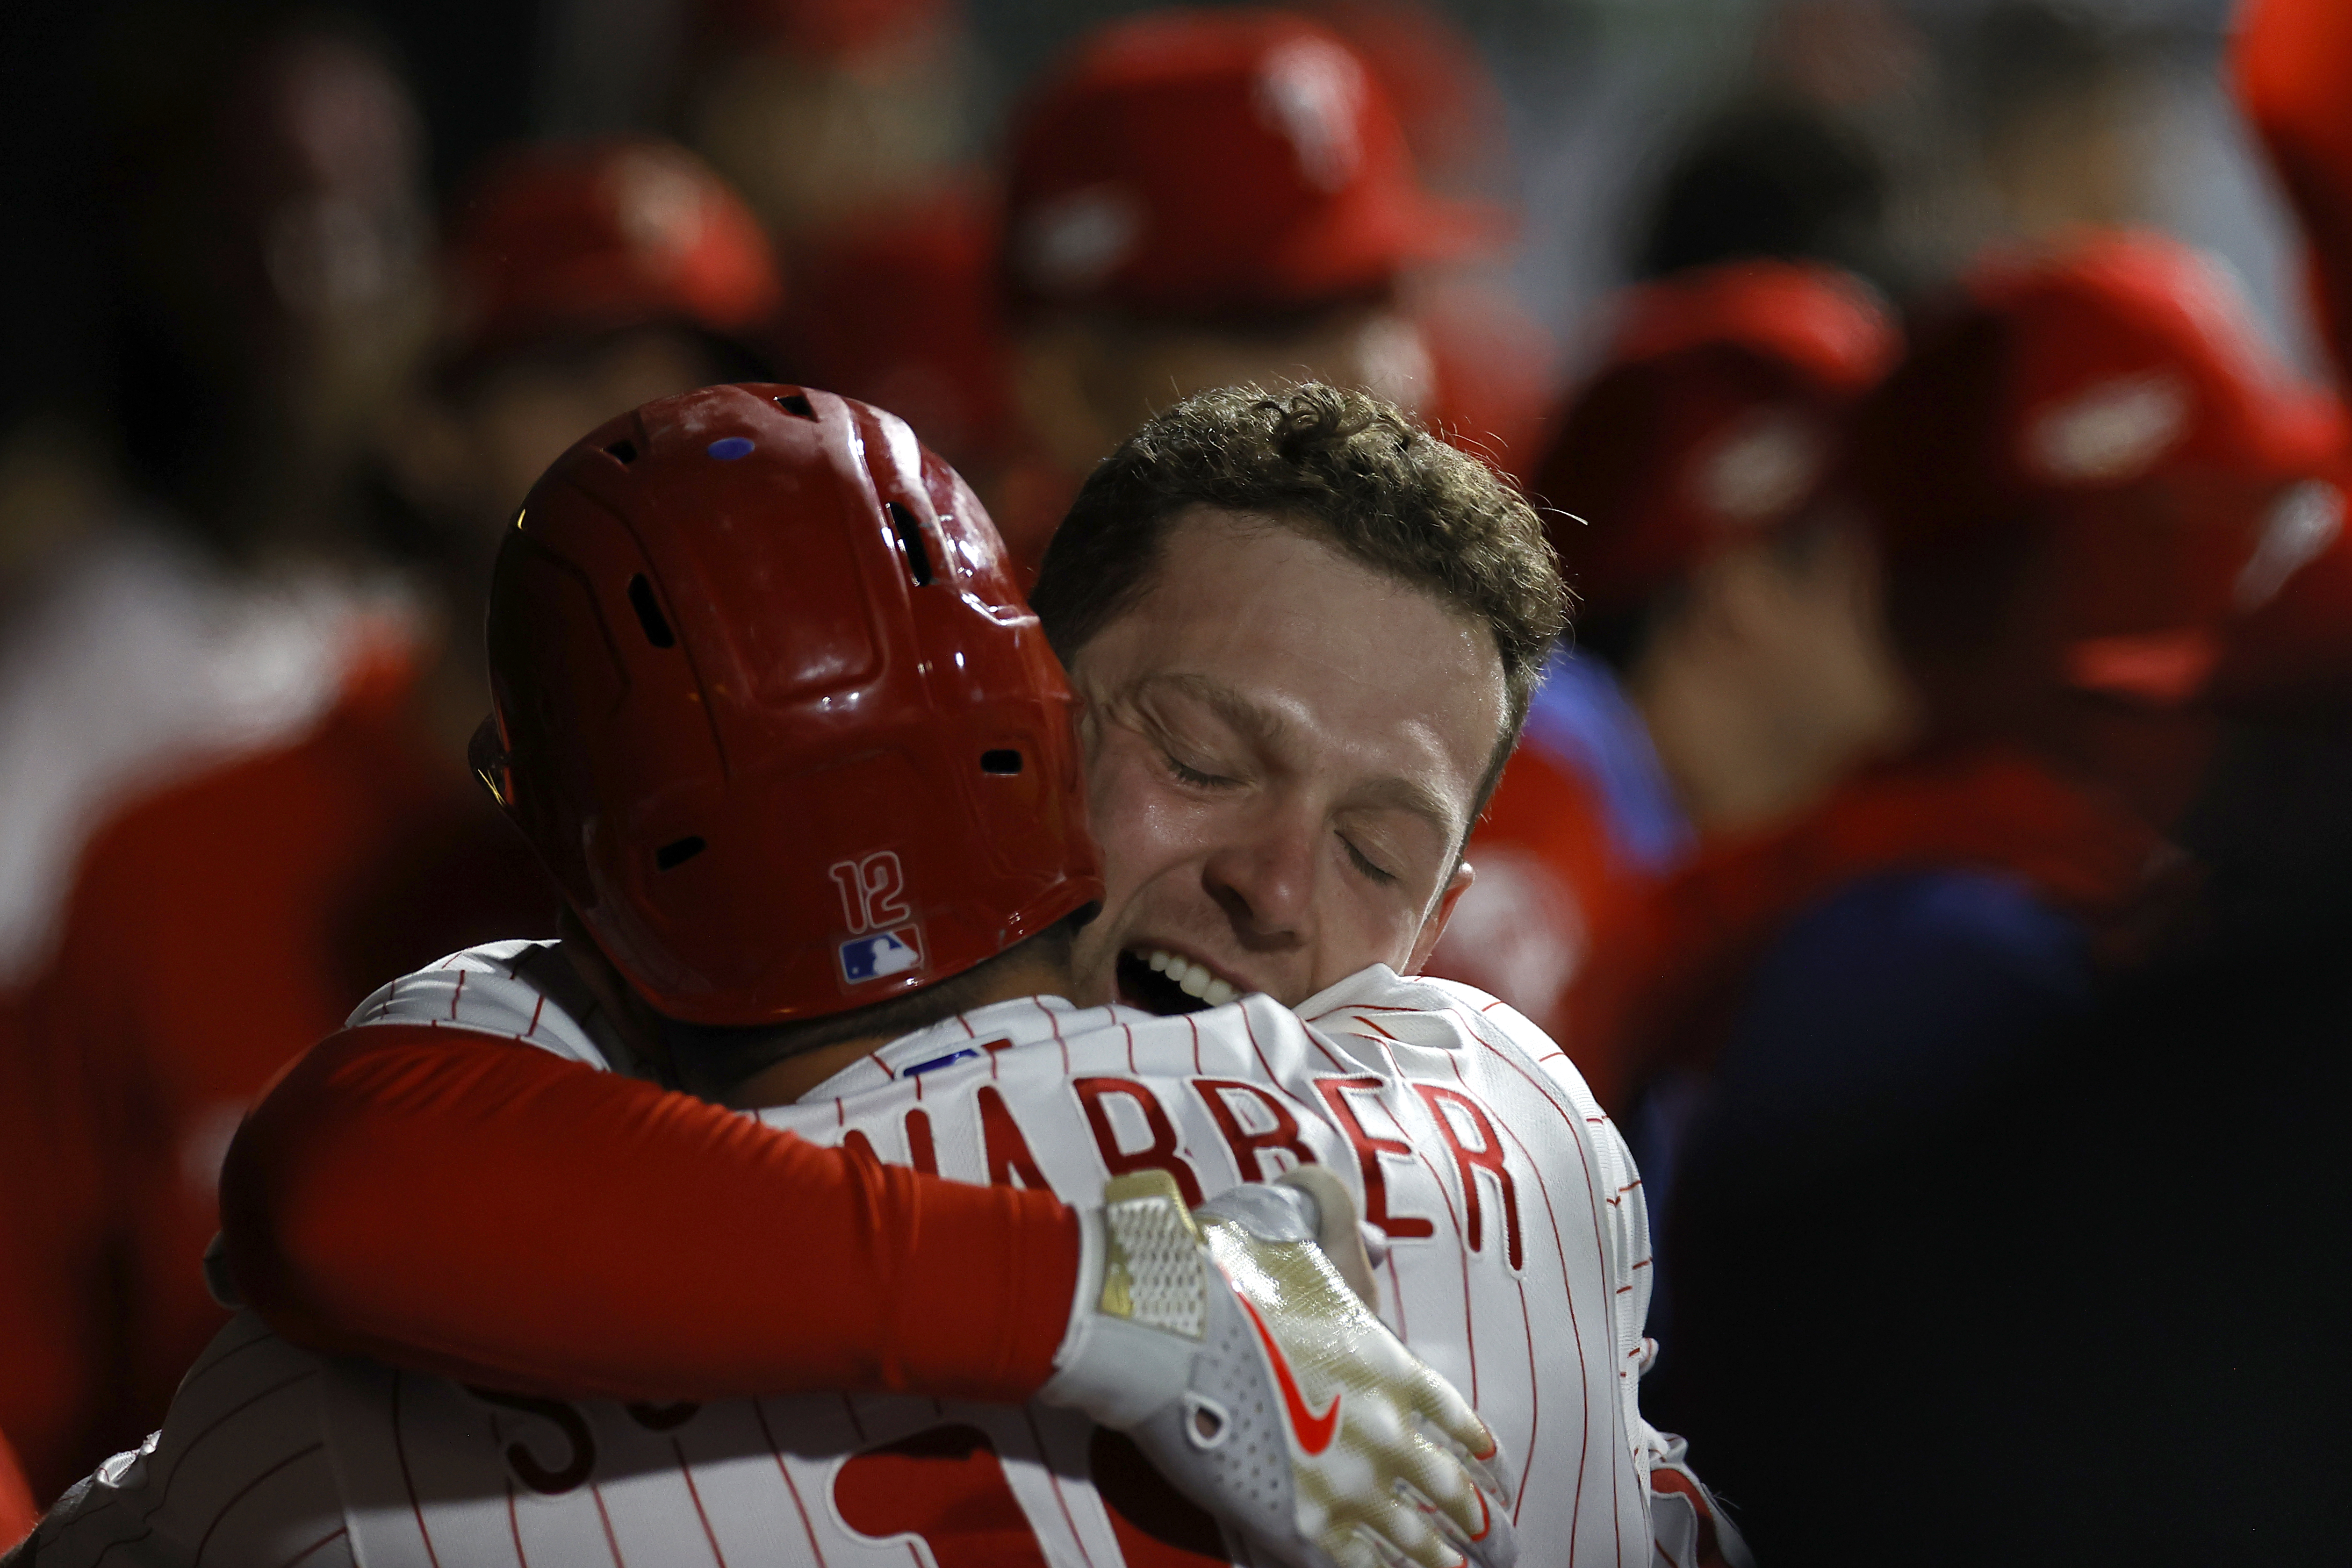 Rhys Hoskins Ignores Boos, Hits Two Homers & Ignites The Phillies.